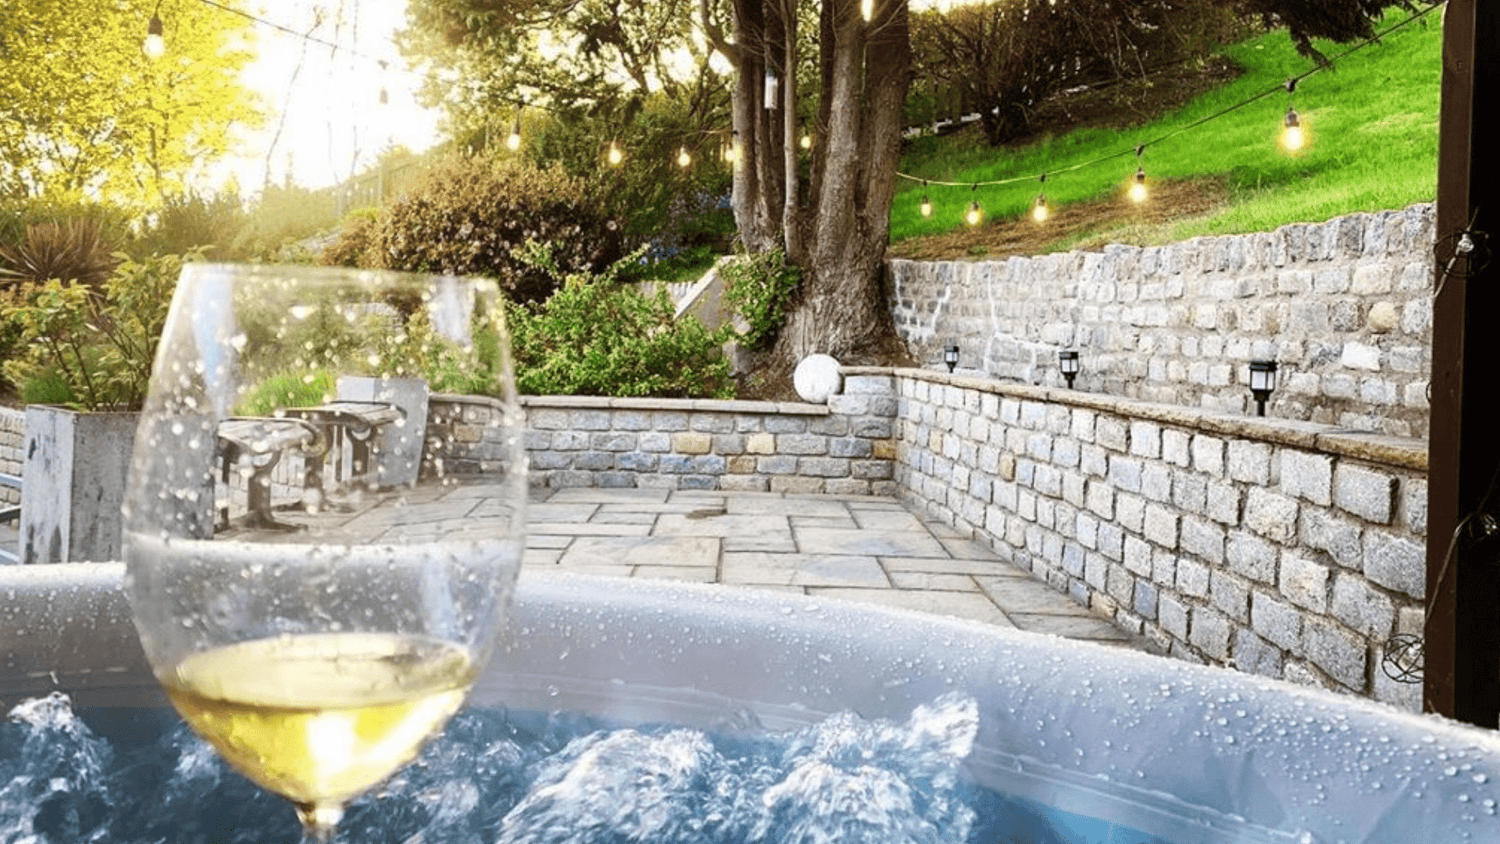 Enhance Your Outdoor Space With a Hot Tub - Wave Spas USA